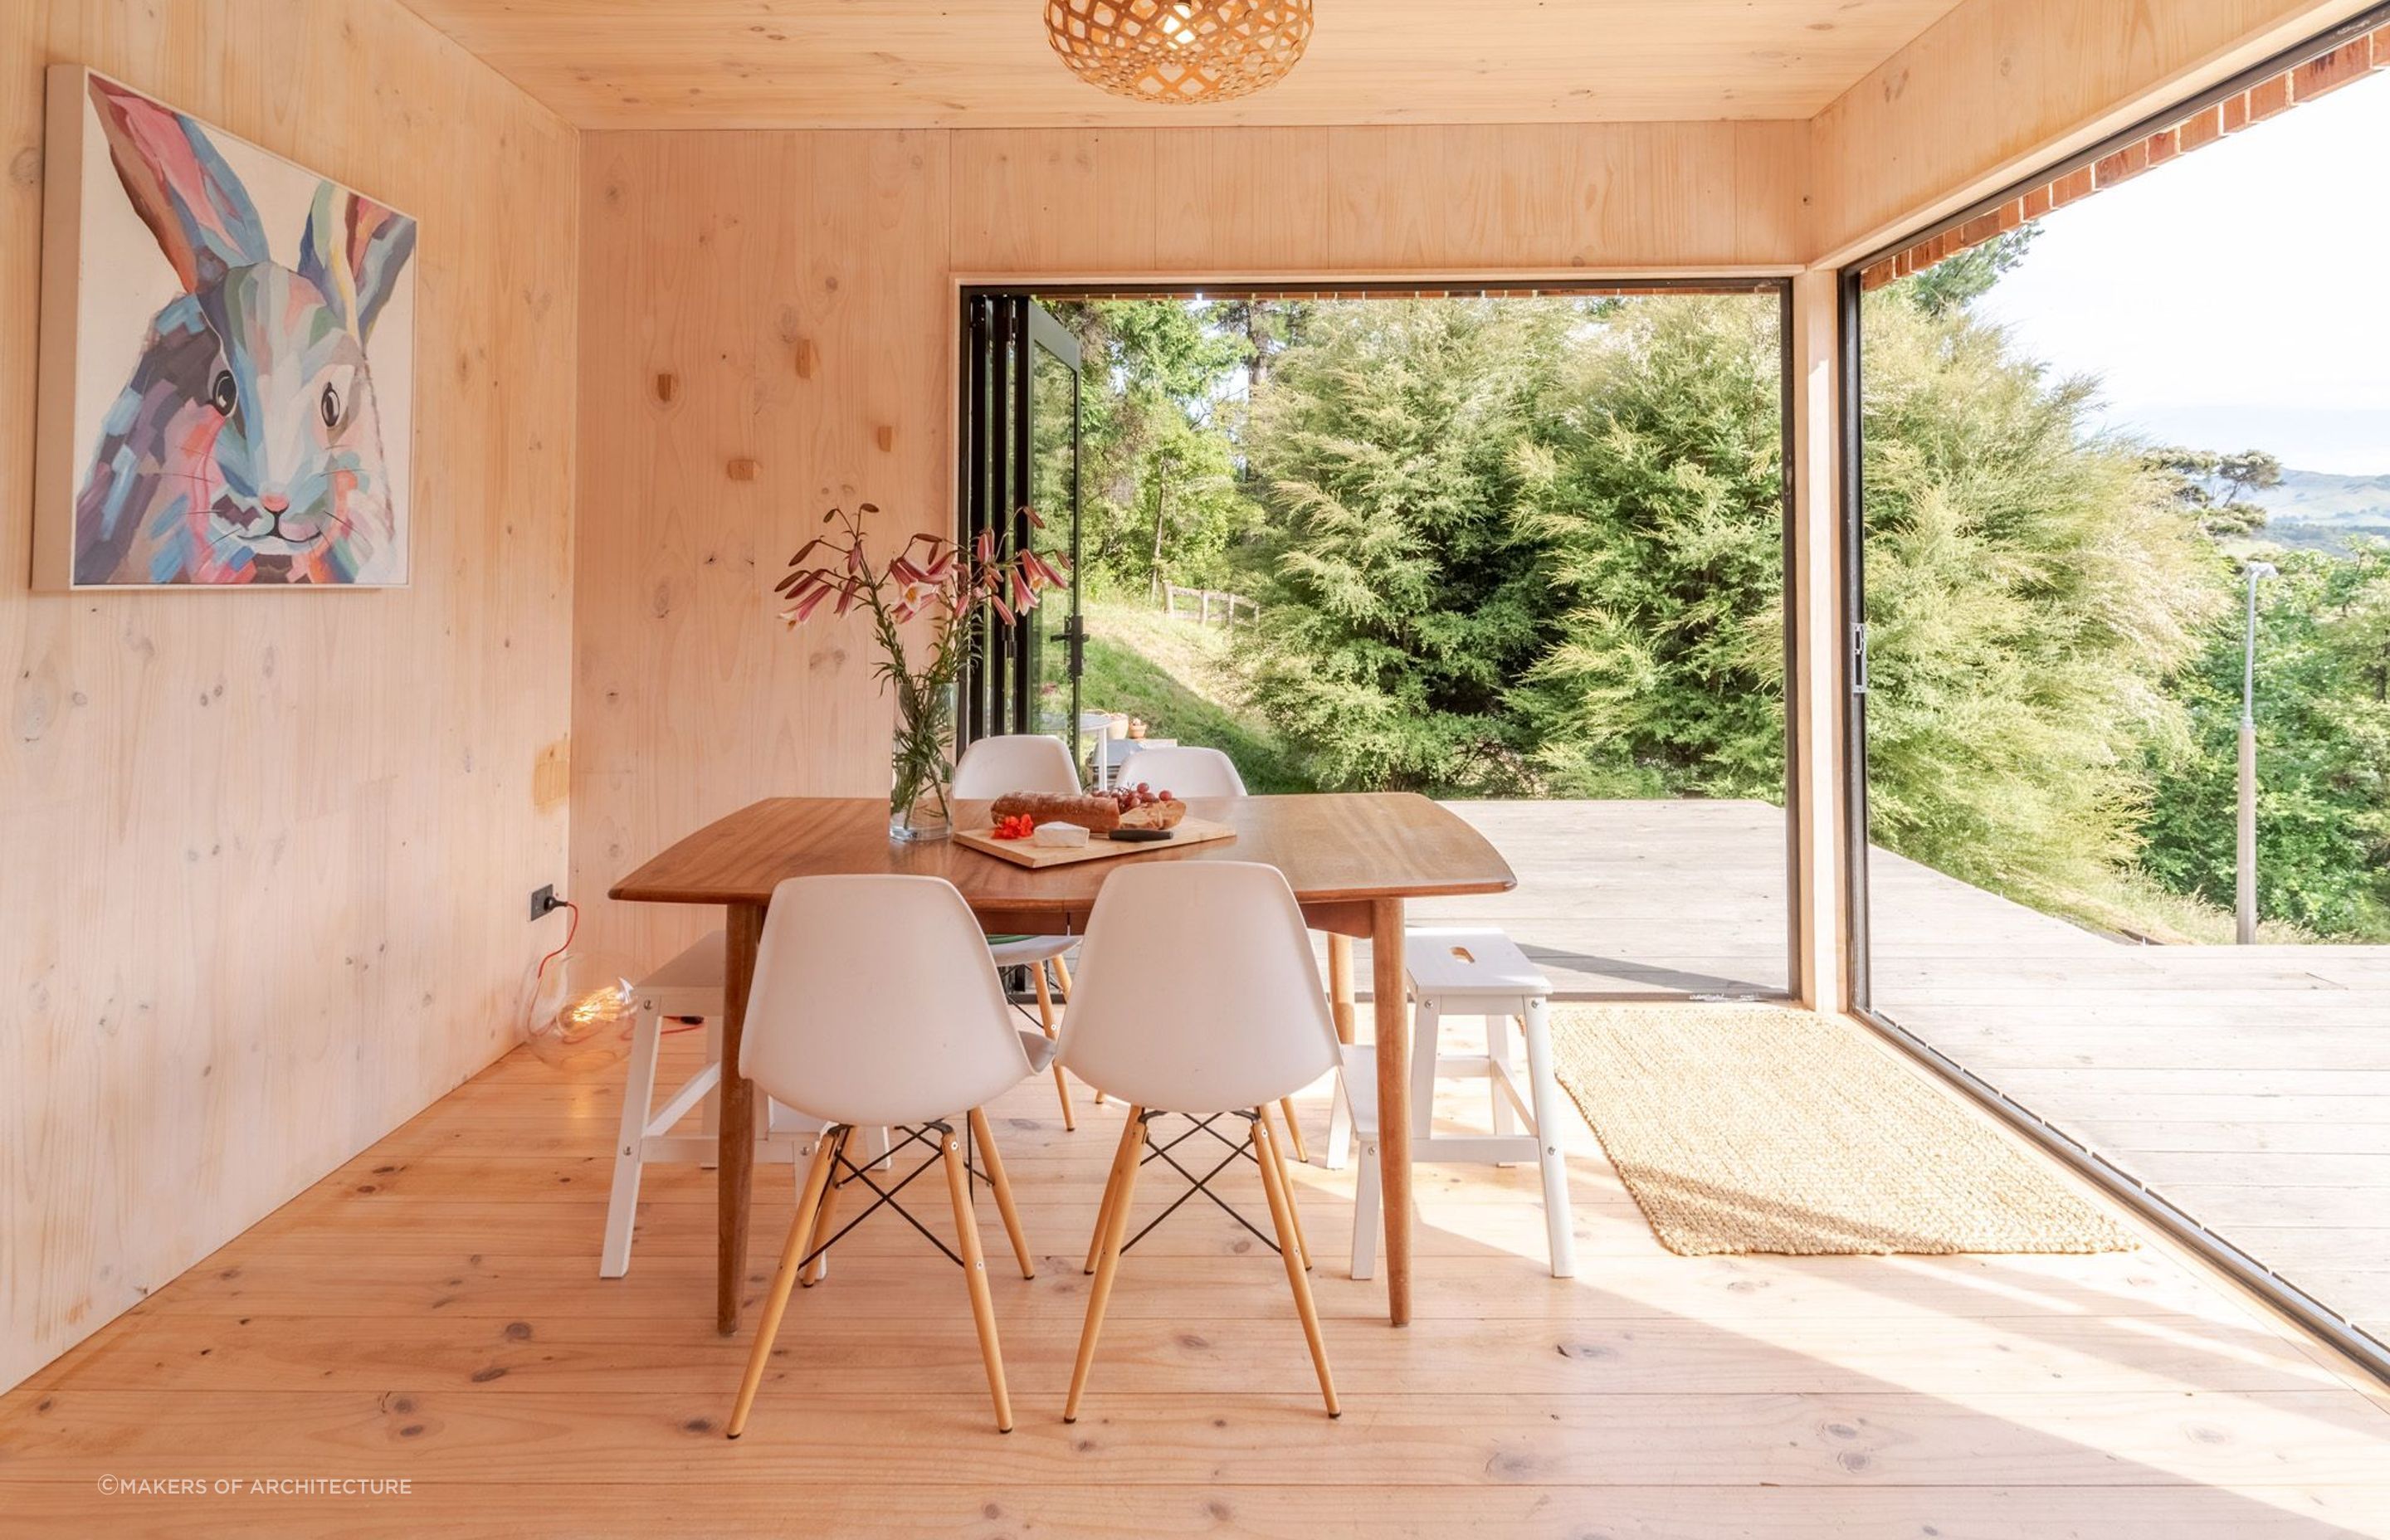 The dining area opens up beautifully onto a decking space with views